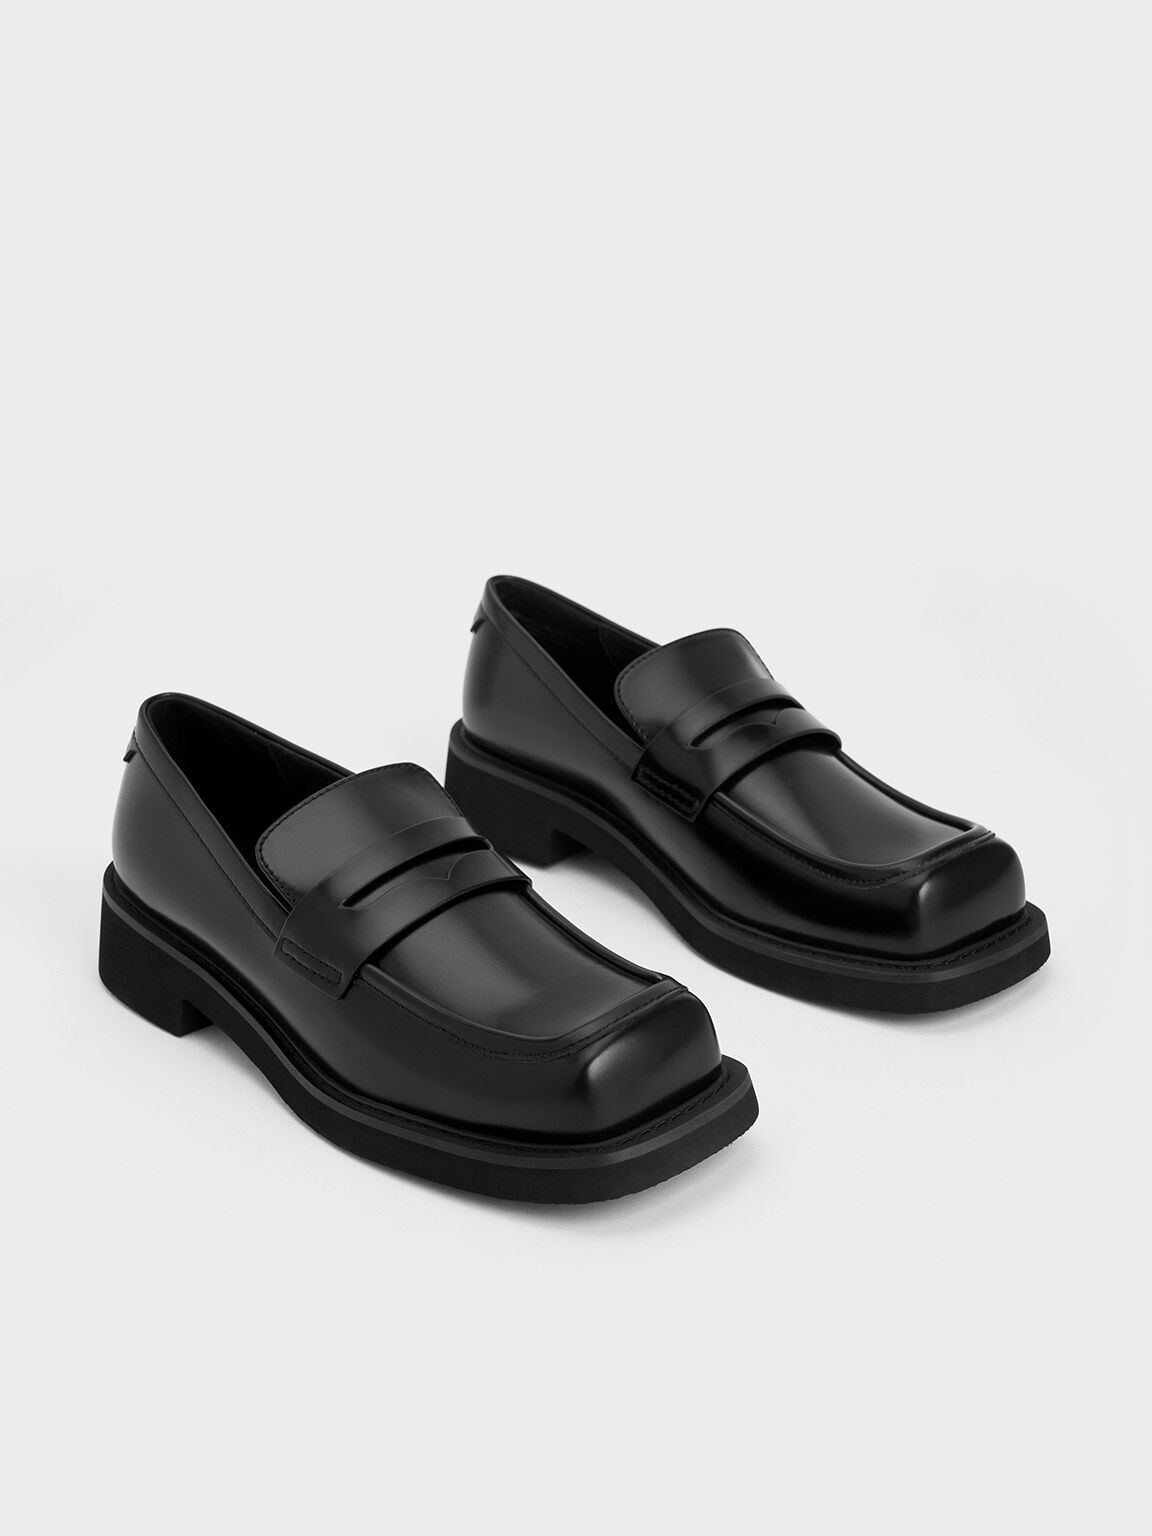 Gabine Chain-Link Leather Loafers - Black